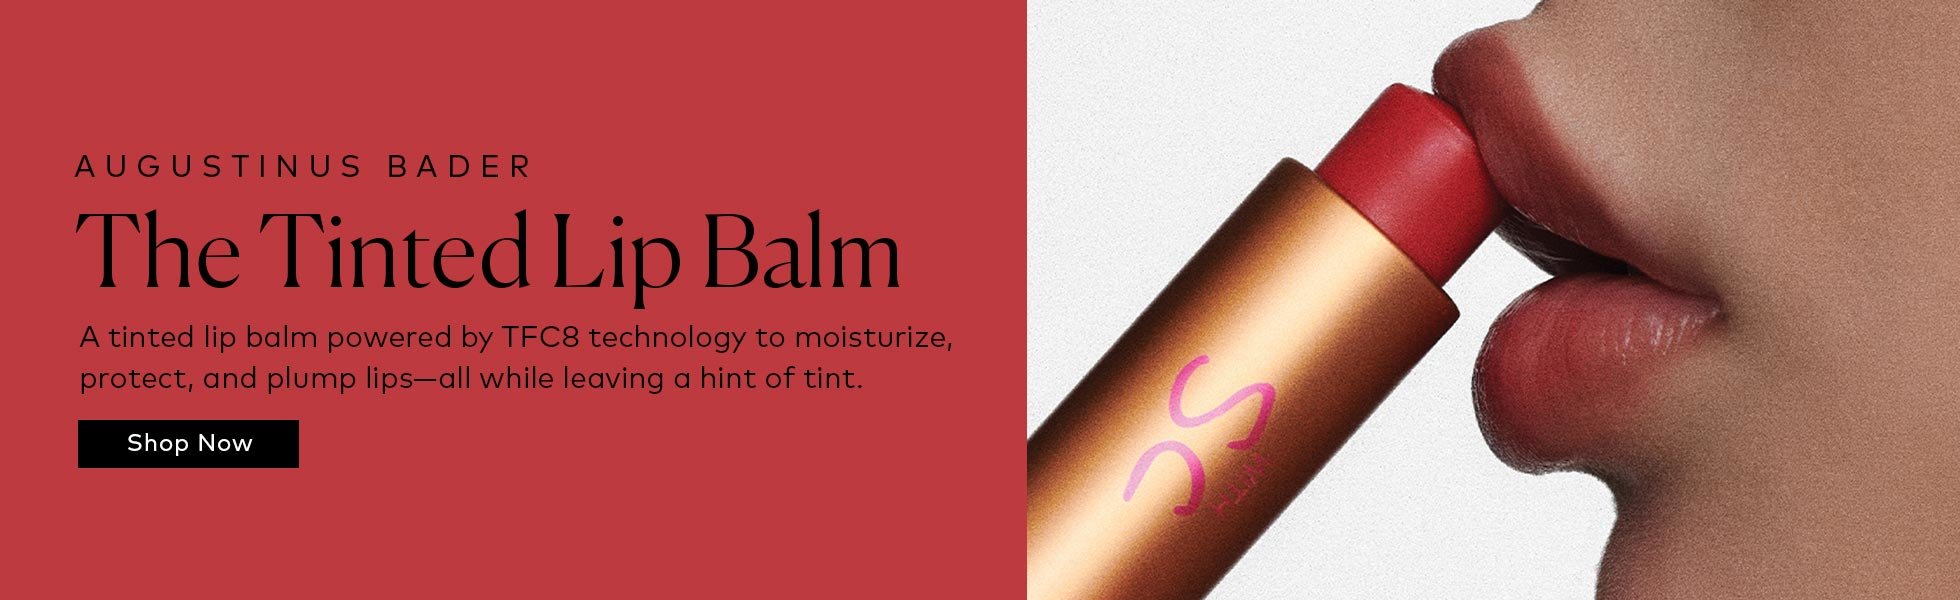 Shop the Augustinus Bader The Tinted Lip Balm